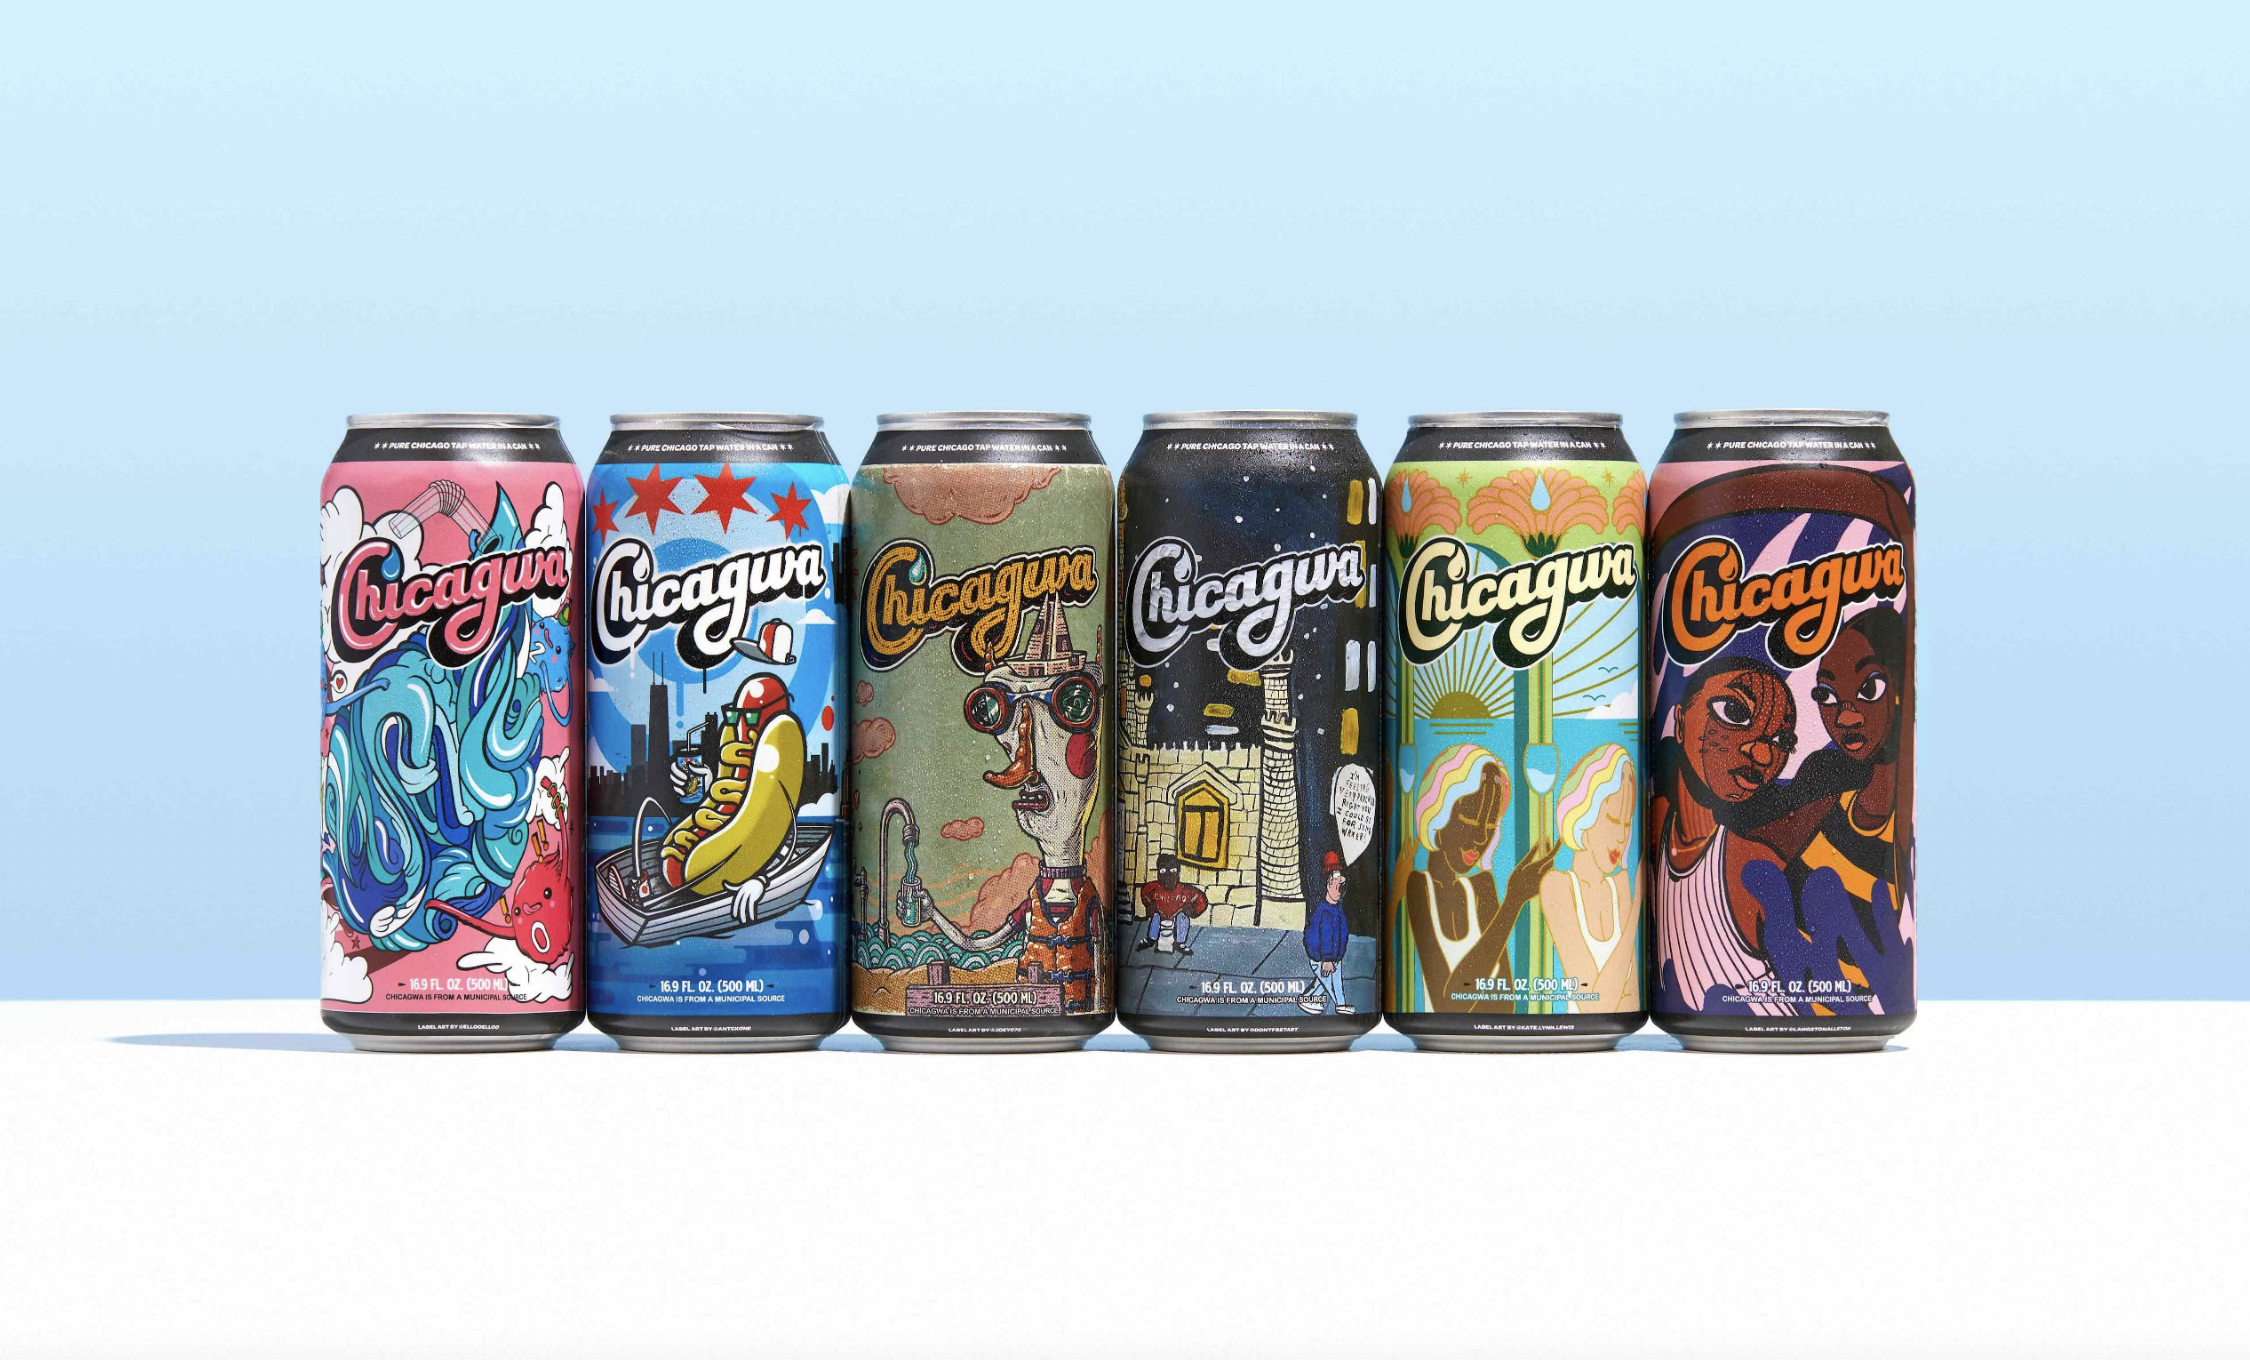 A row of six cans with colorful labels.